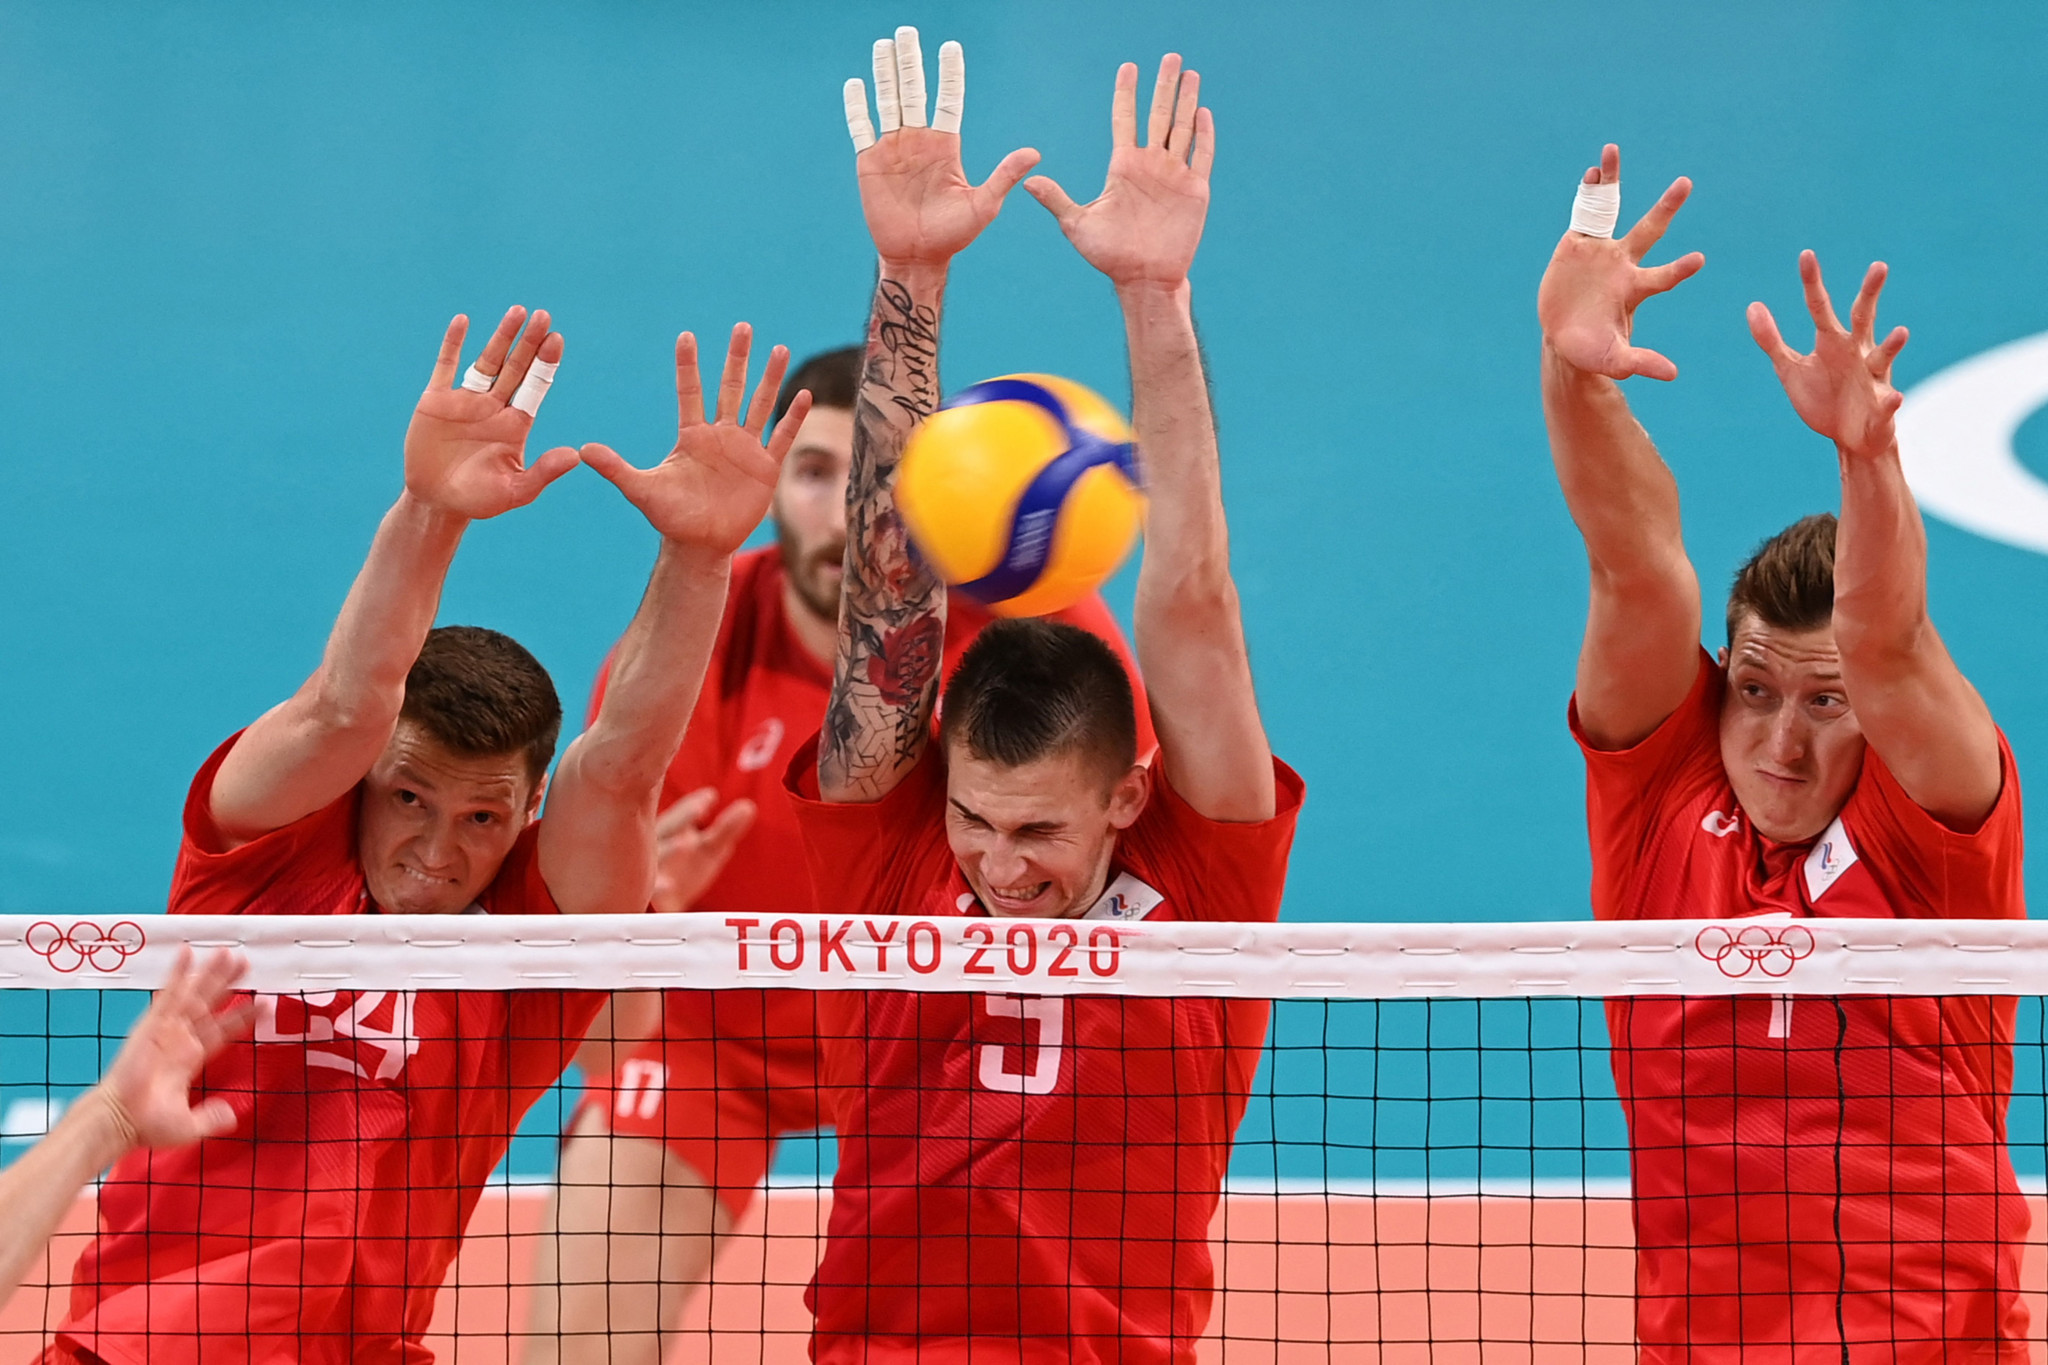 Russia claims FIVB broke promise to compensate them for moving World Championships after Ukraine invasion